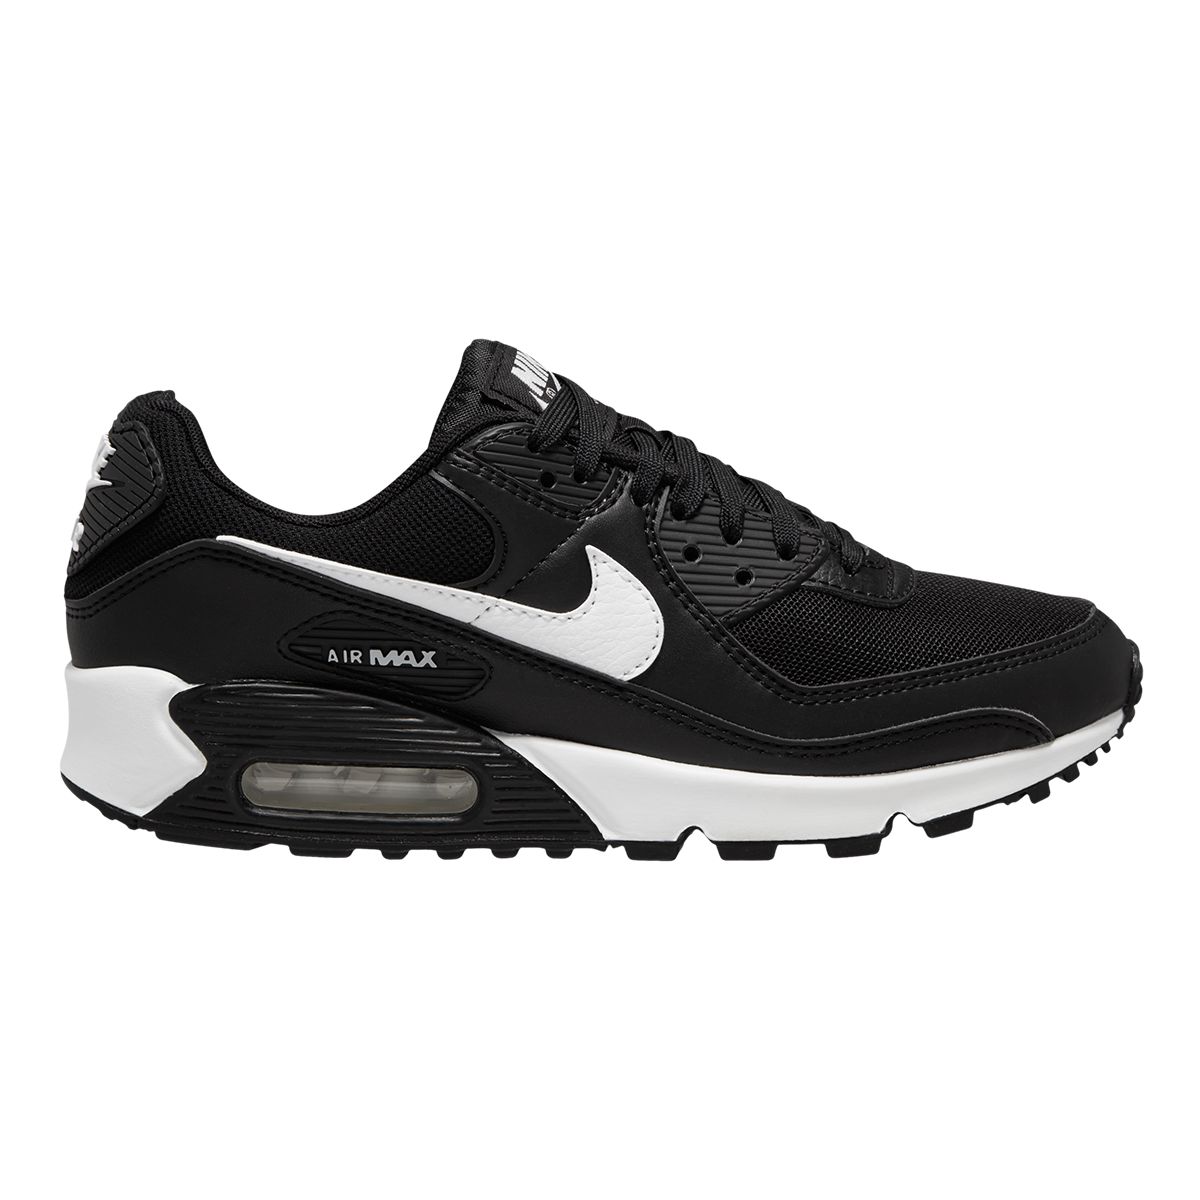 Nike Women's Air Max 90 Shoes  Sneakers Low Top Cushioned